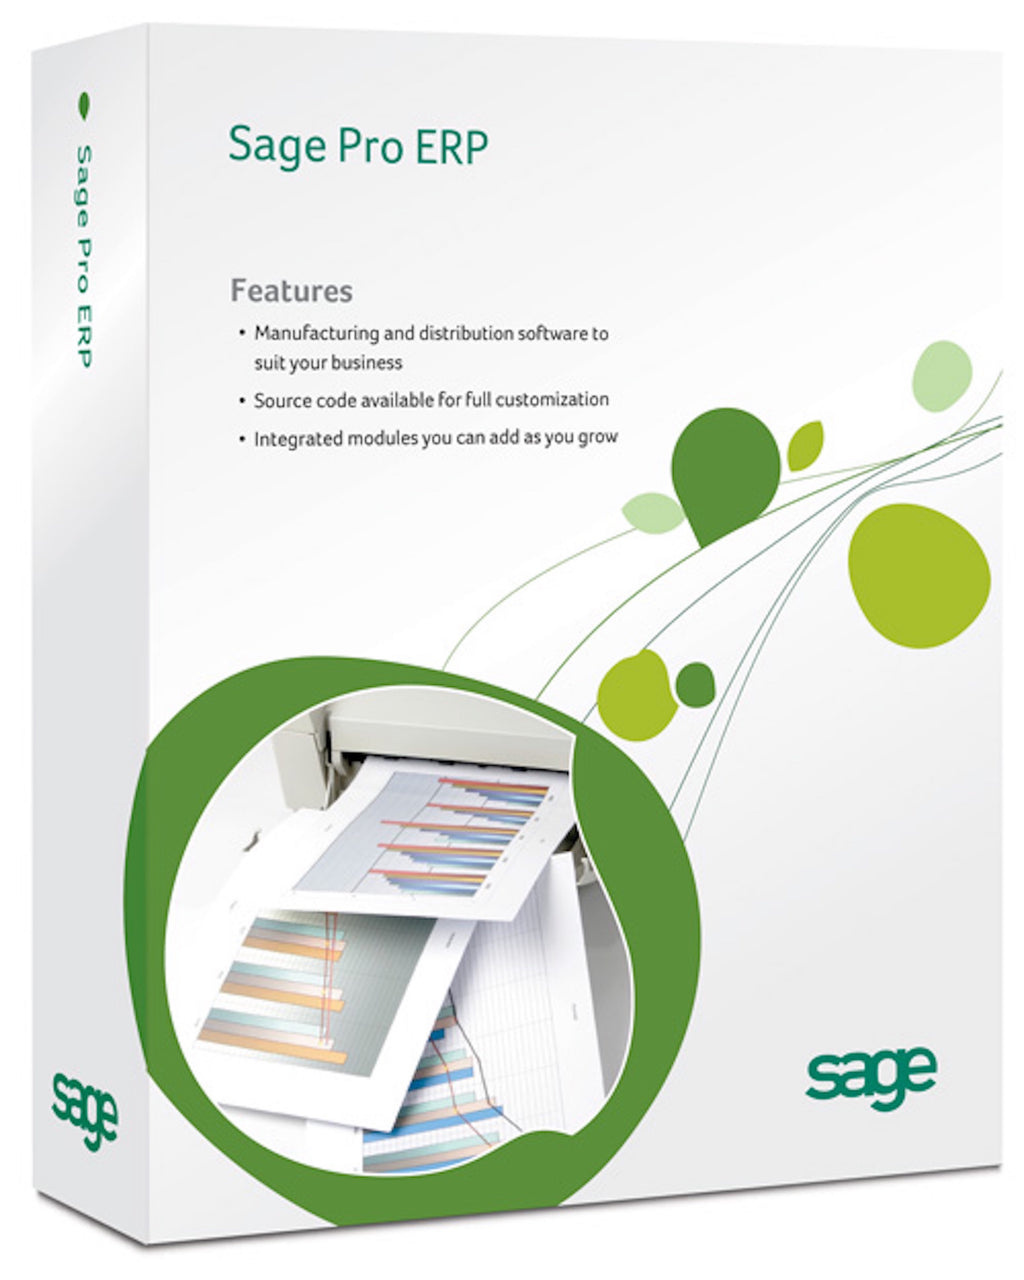 Sage Pro software applications help